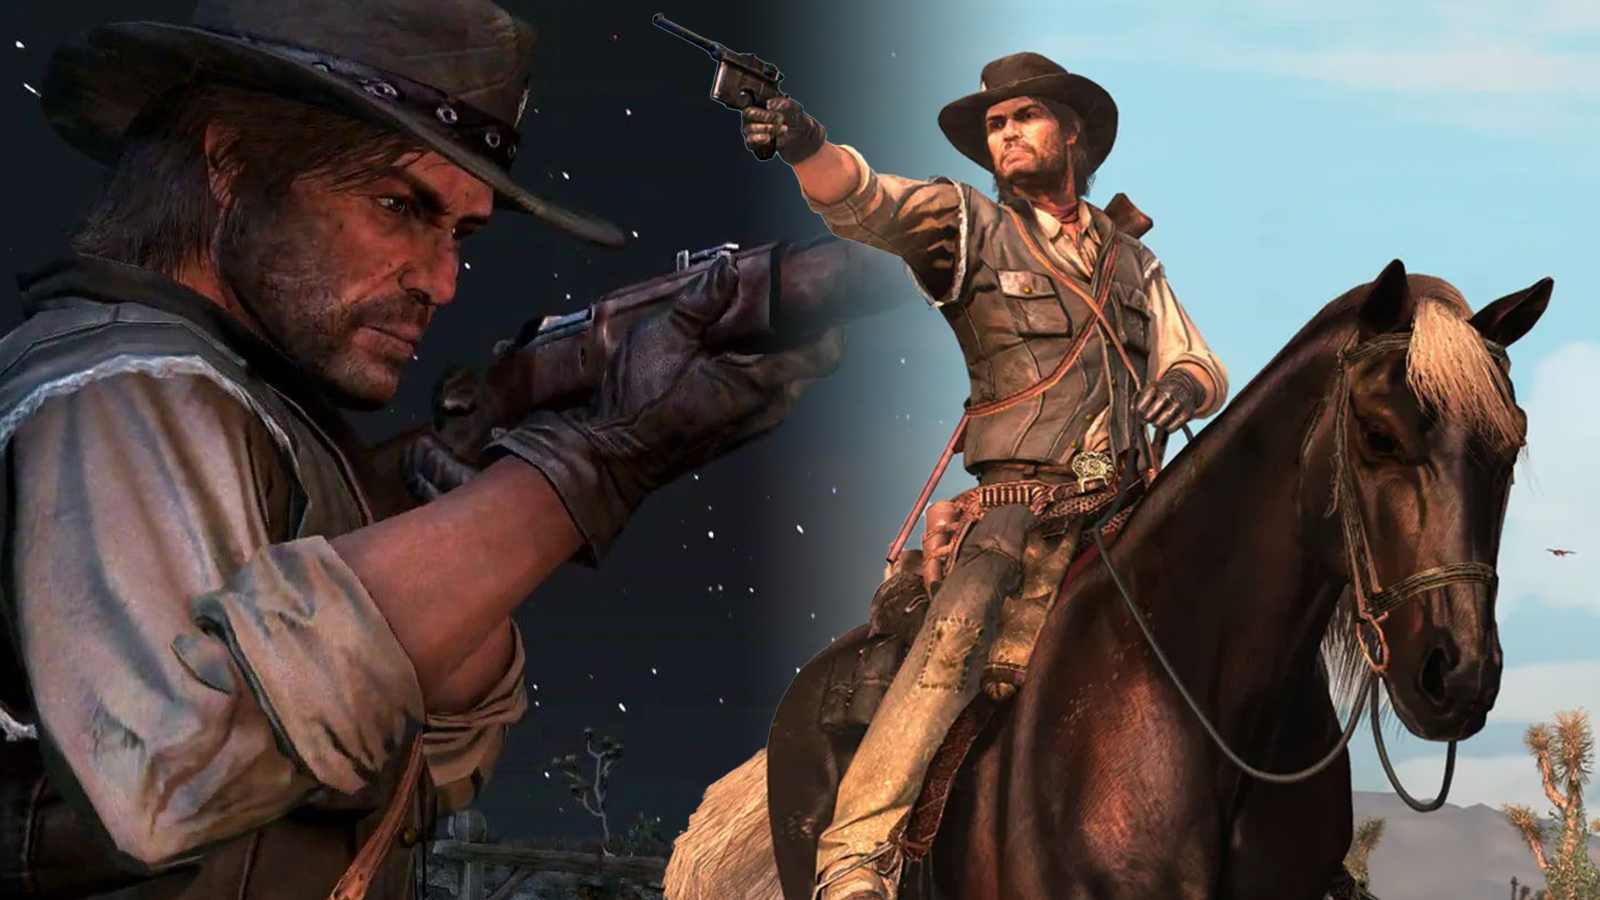 Red Dead Redemption trophies revealed for PS4 rerelease with platinum